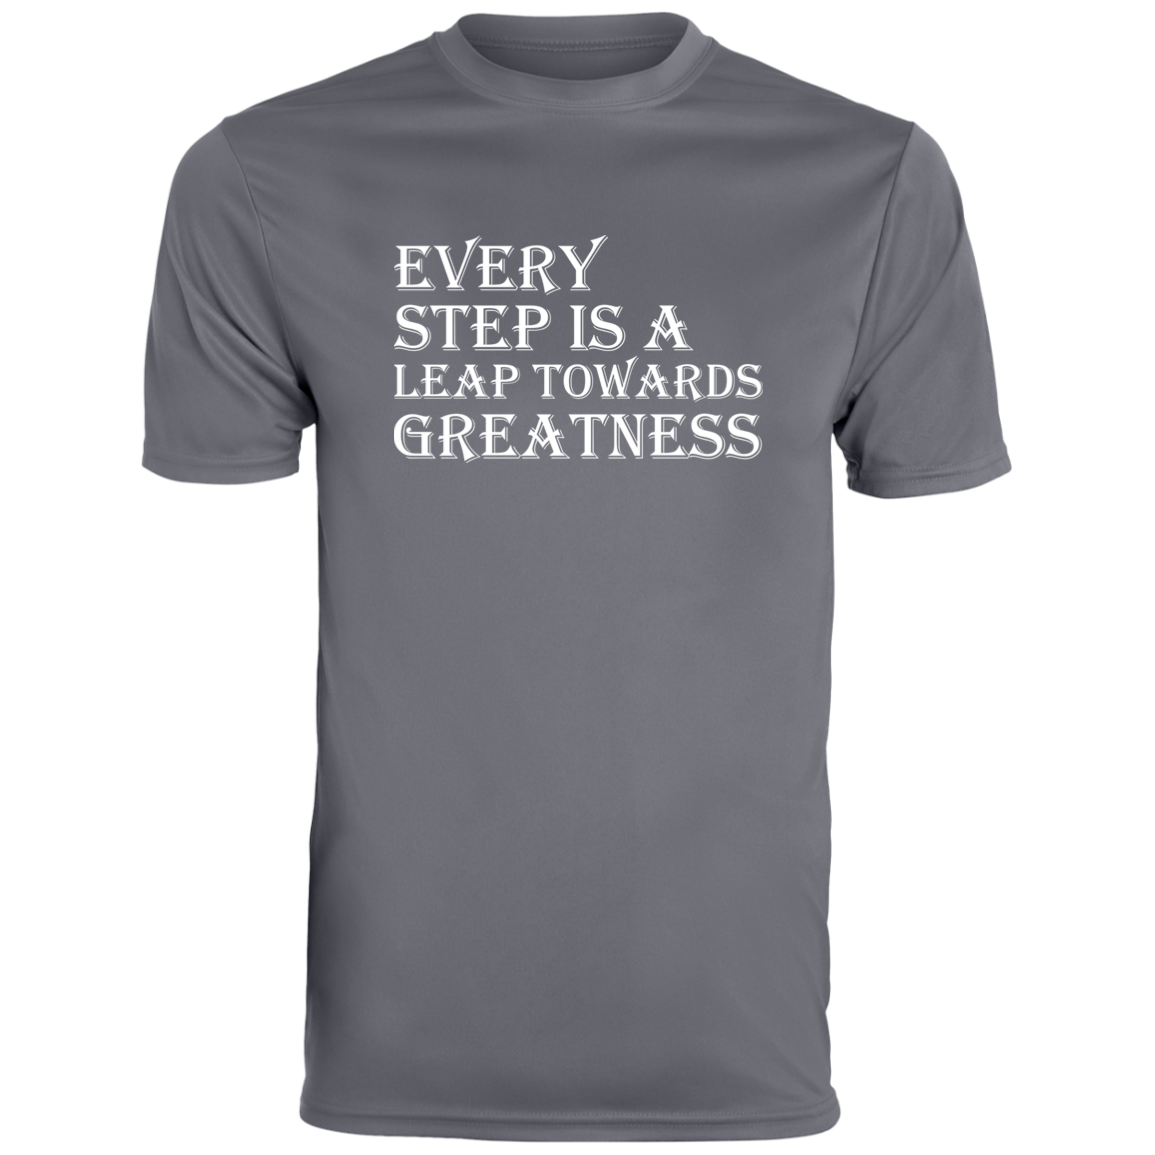 Men's Inspirational Top Every step is a leap towards greatness